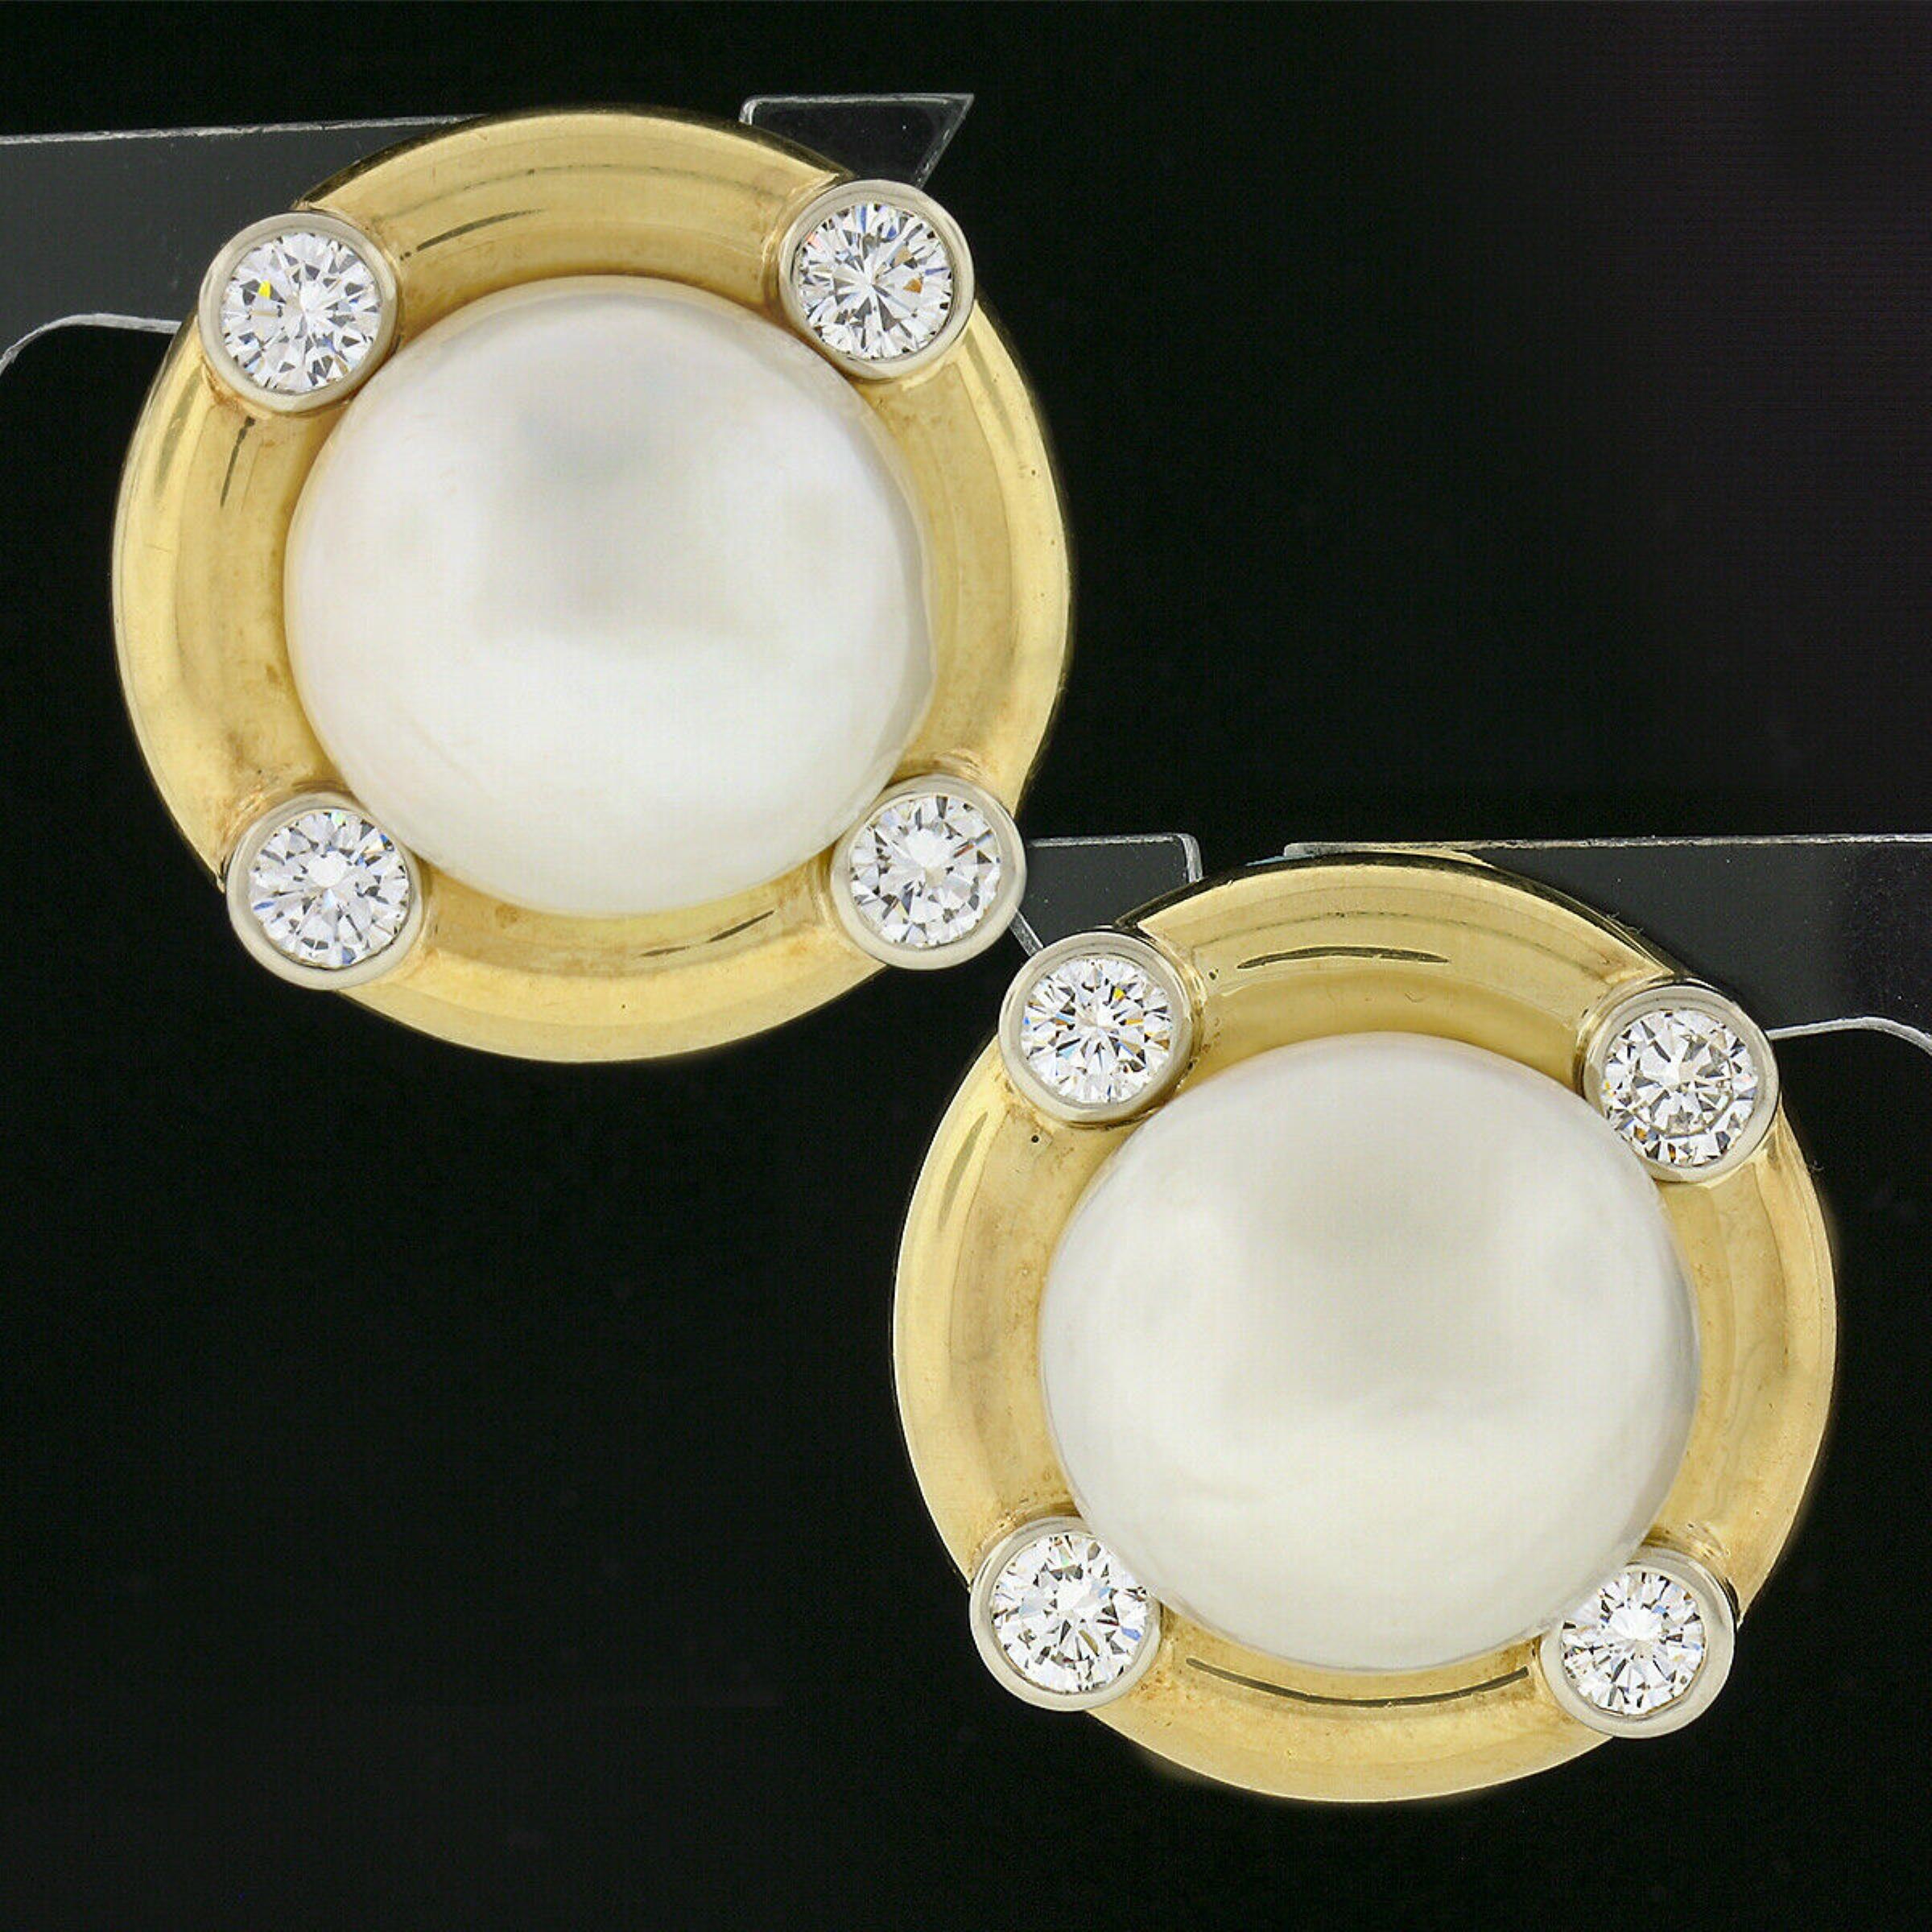 This magnificent pair of button statement earrings was crafted from solid 18k yellow and white gold. They each feature a very large, GIA certified, saltwater cultured pearl at their center, surrounded by a high polished finish frame adorned with